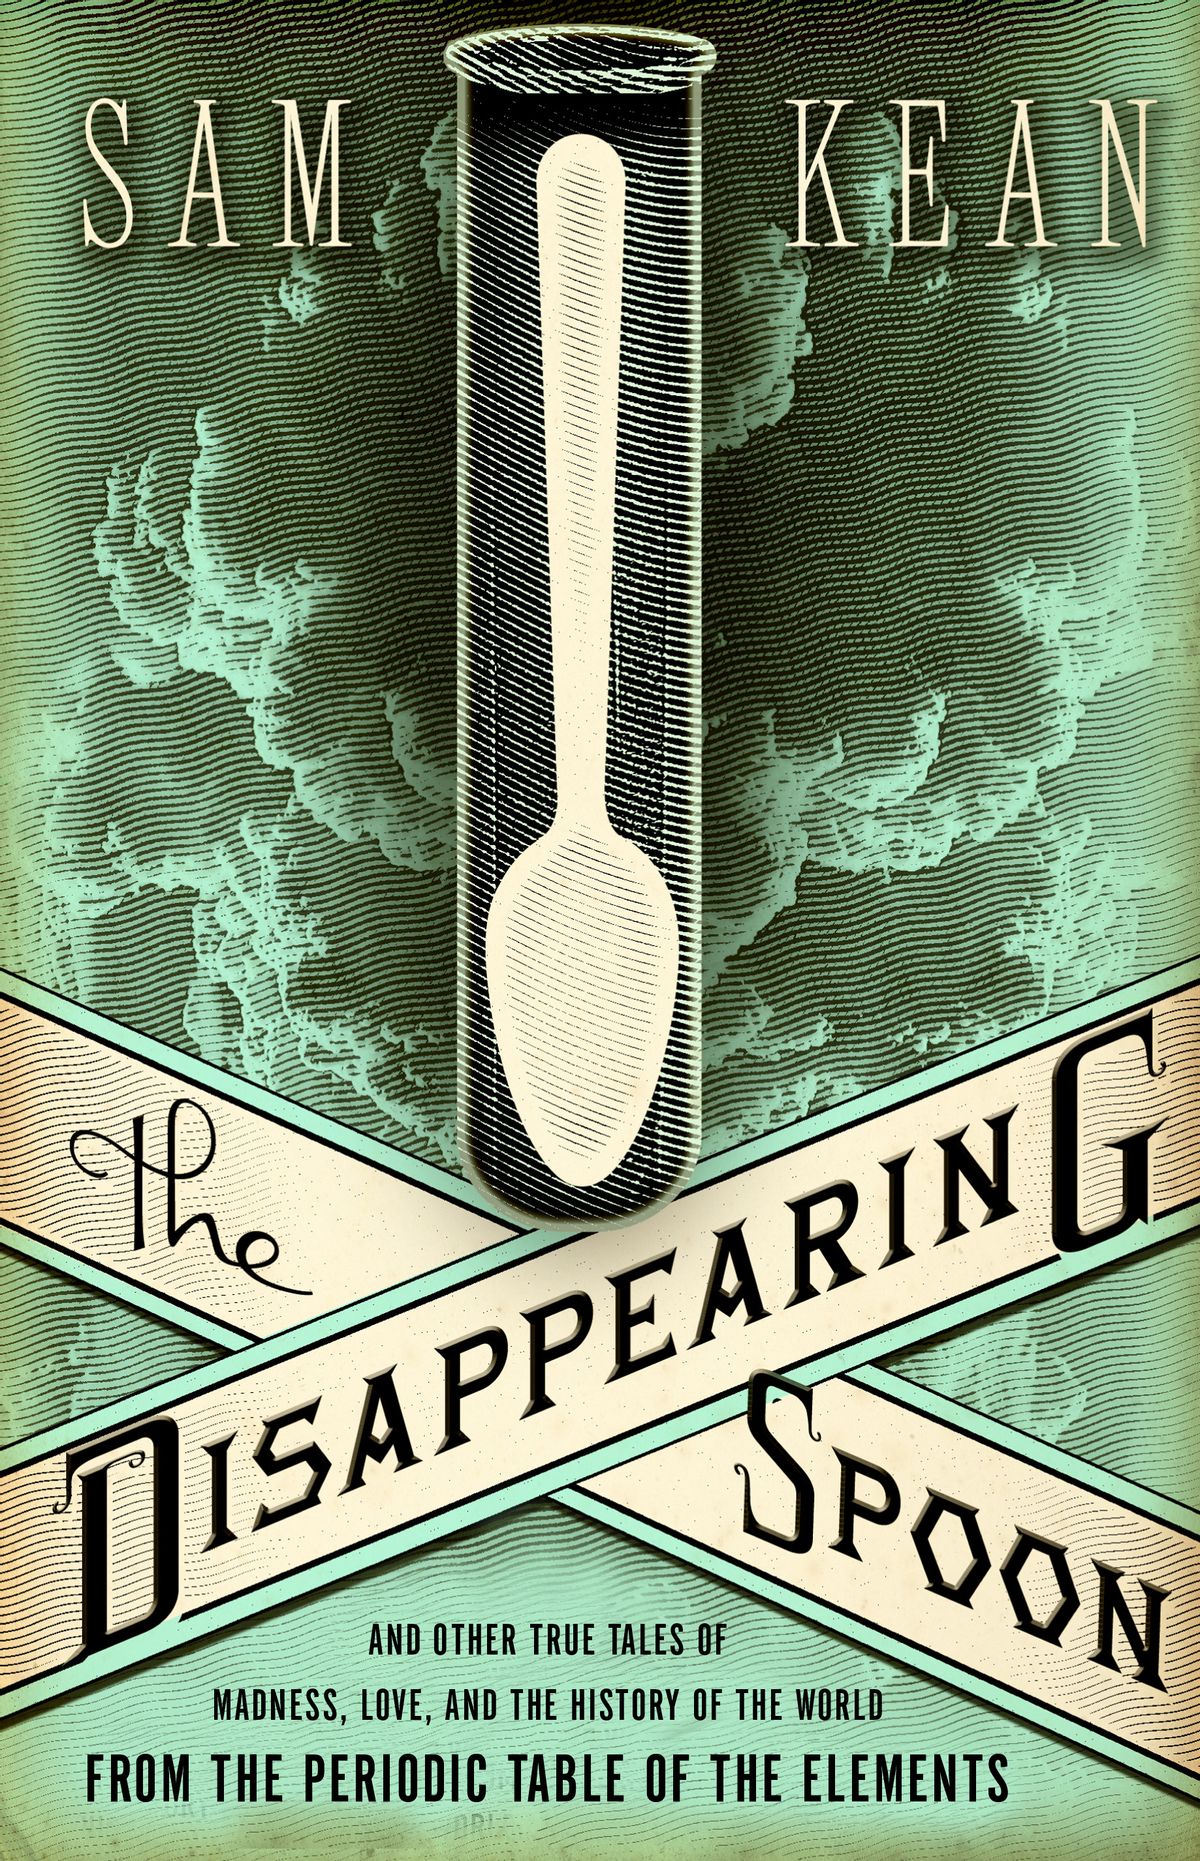 "The Disappearing Spoon" by Sam Kean 